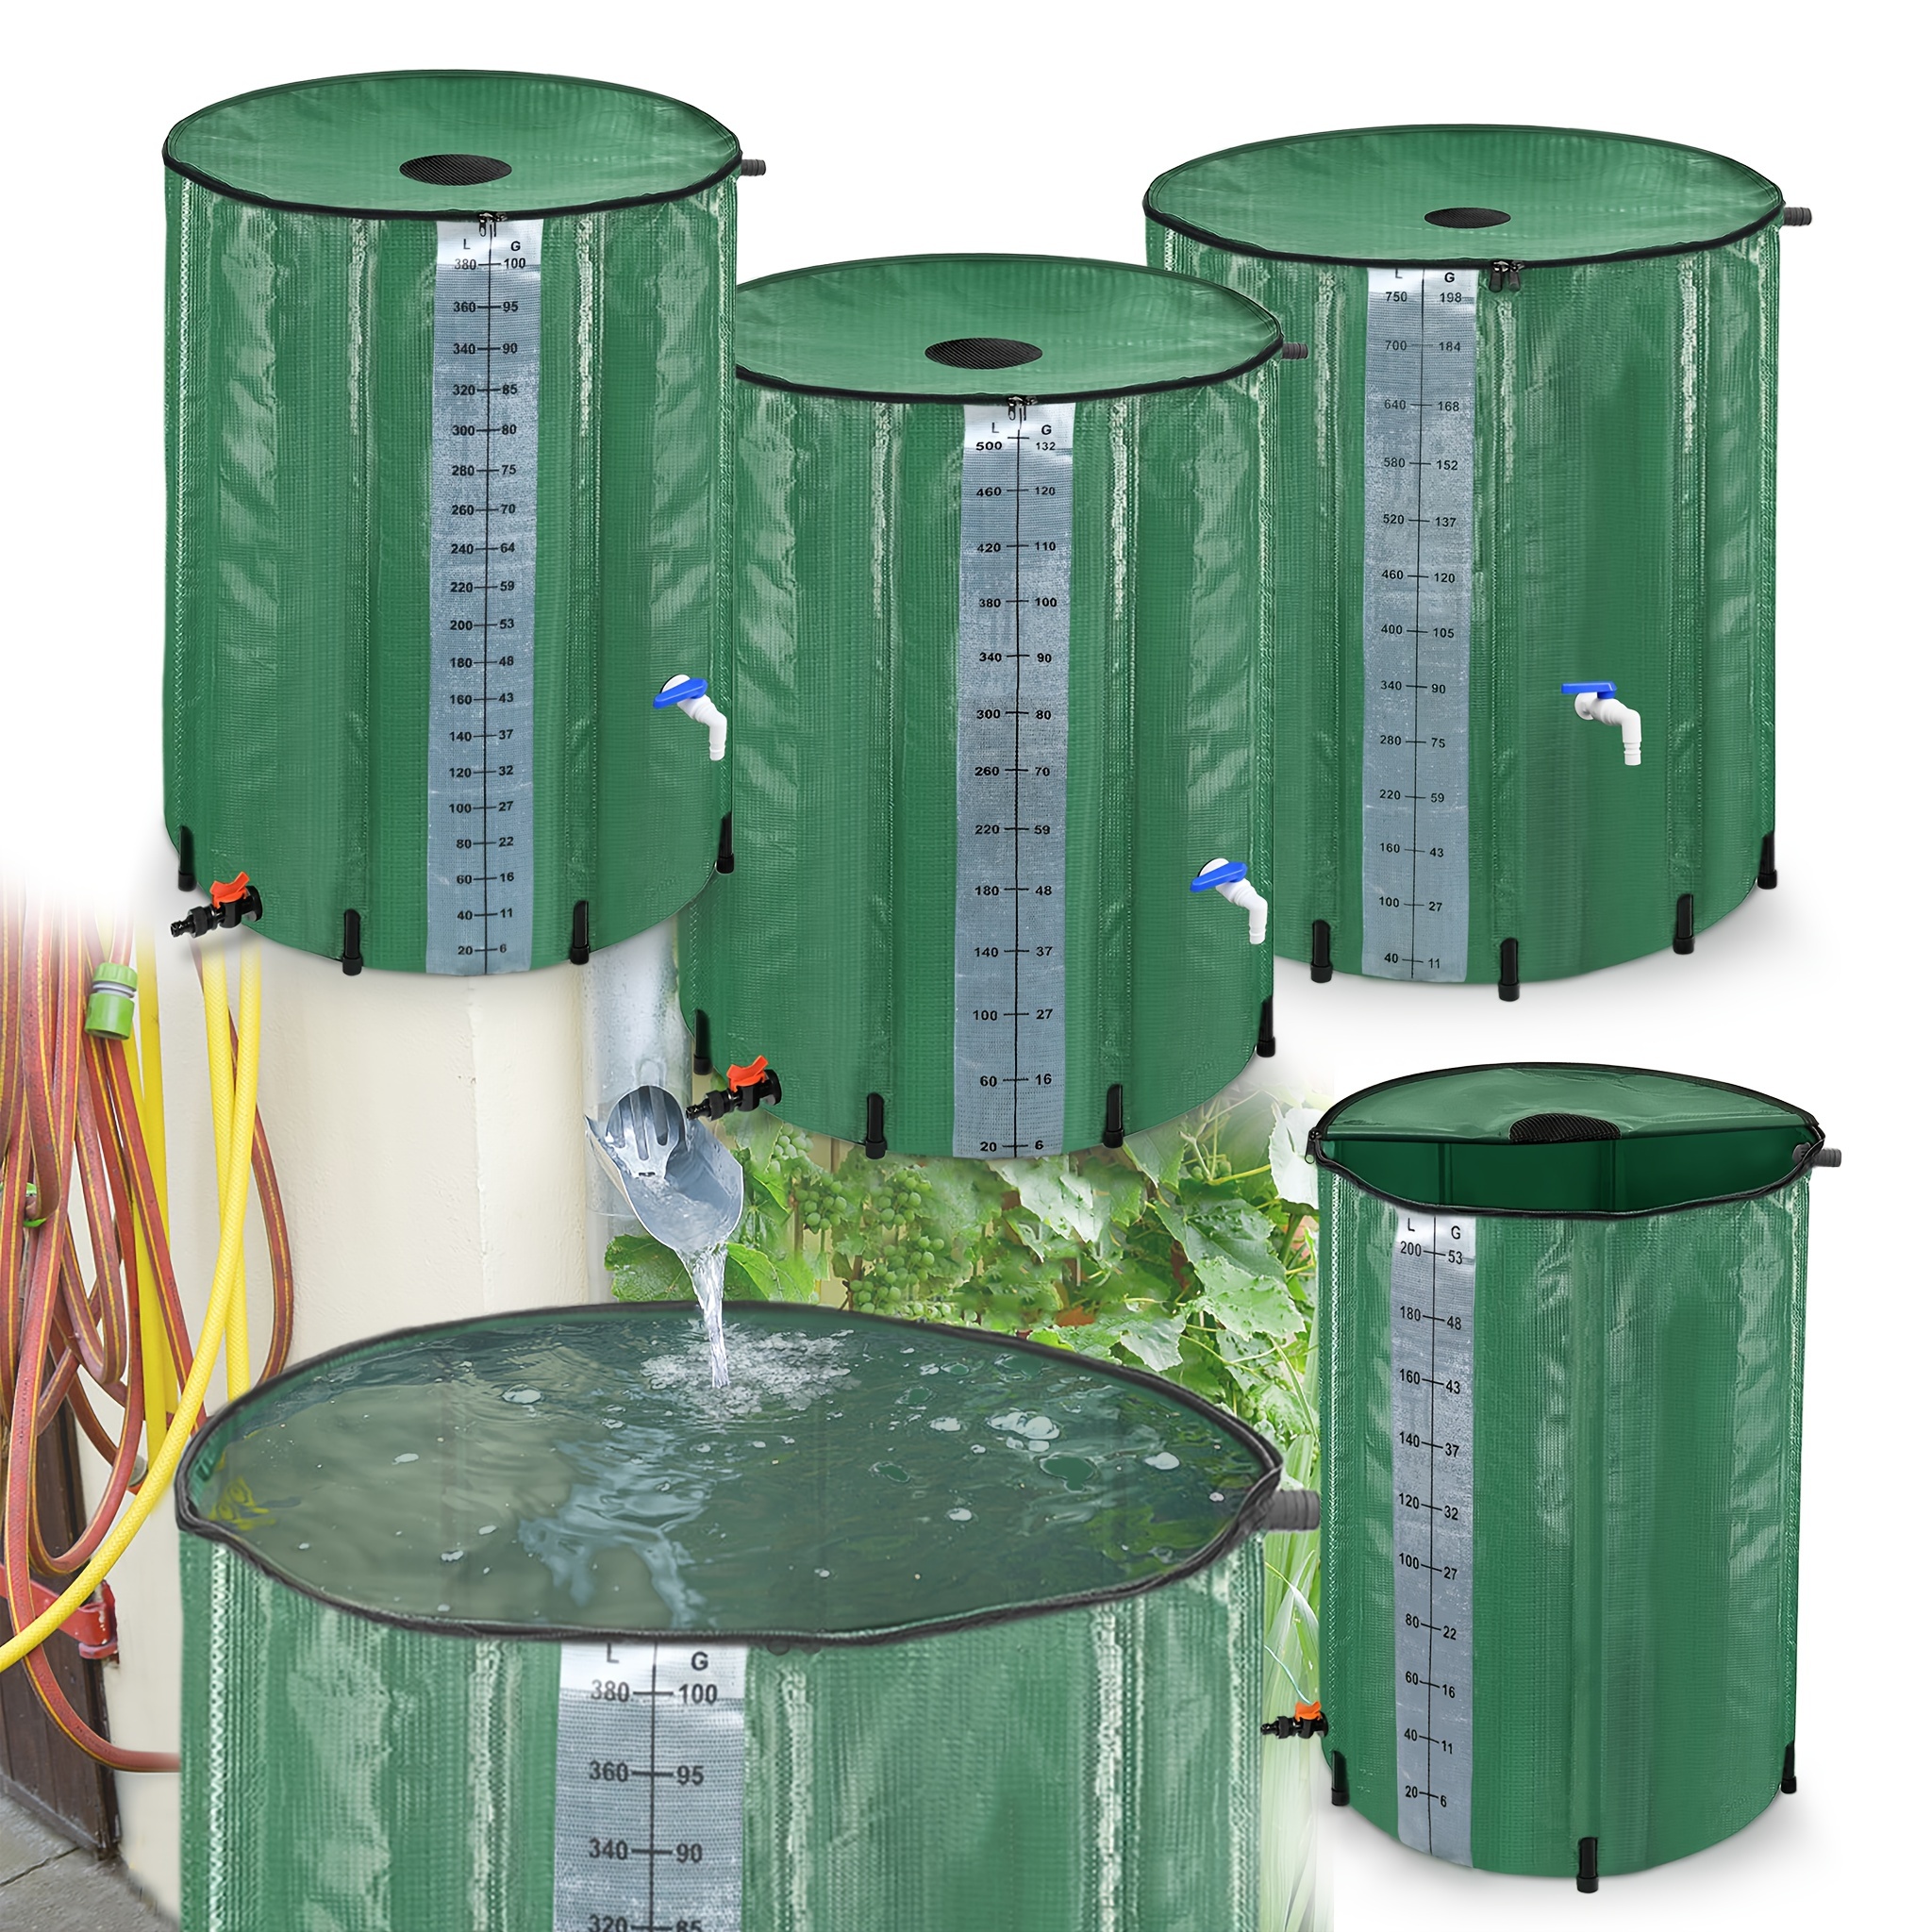 

Lars360 200/380/500 Litre Foldable Rain Barrel Rainwater Tank Rainwater Barrel Water Collection Container With Drain Valve And Additional Scale For Precise Water Level Garden Watering, Green